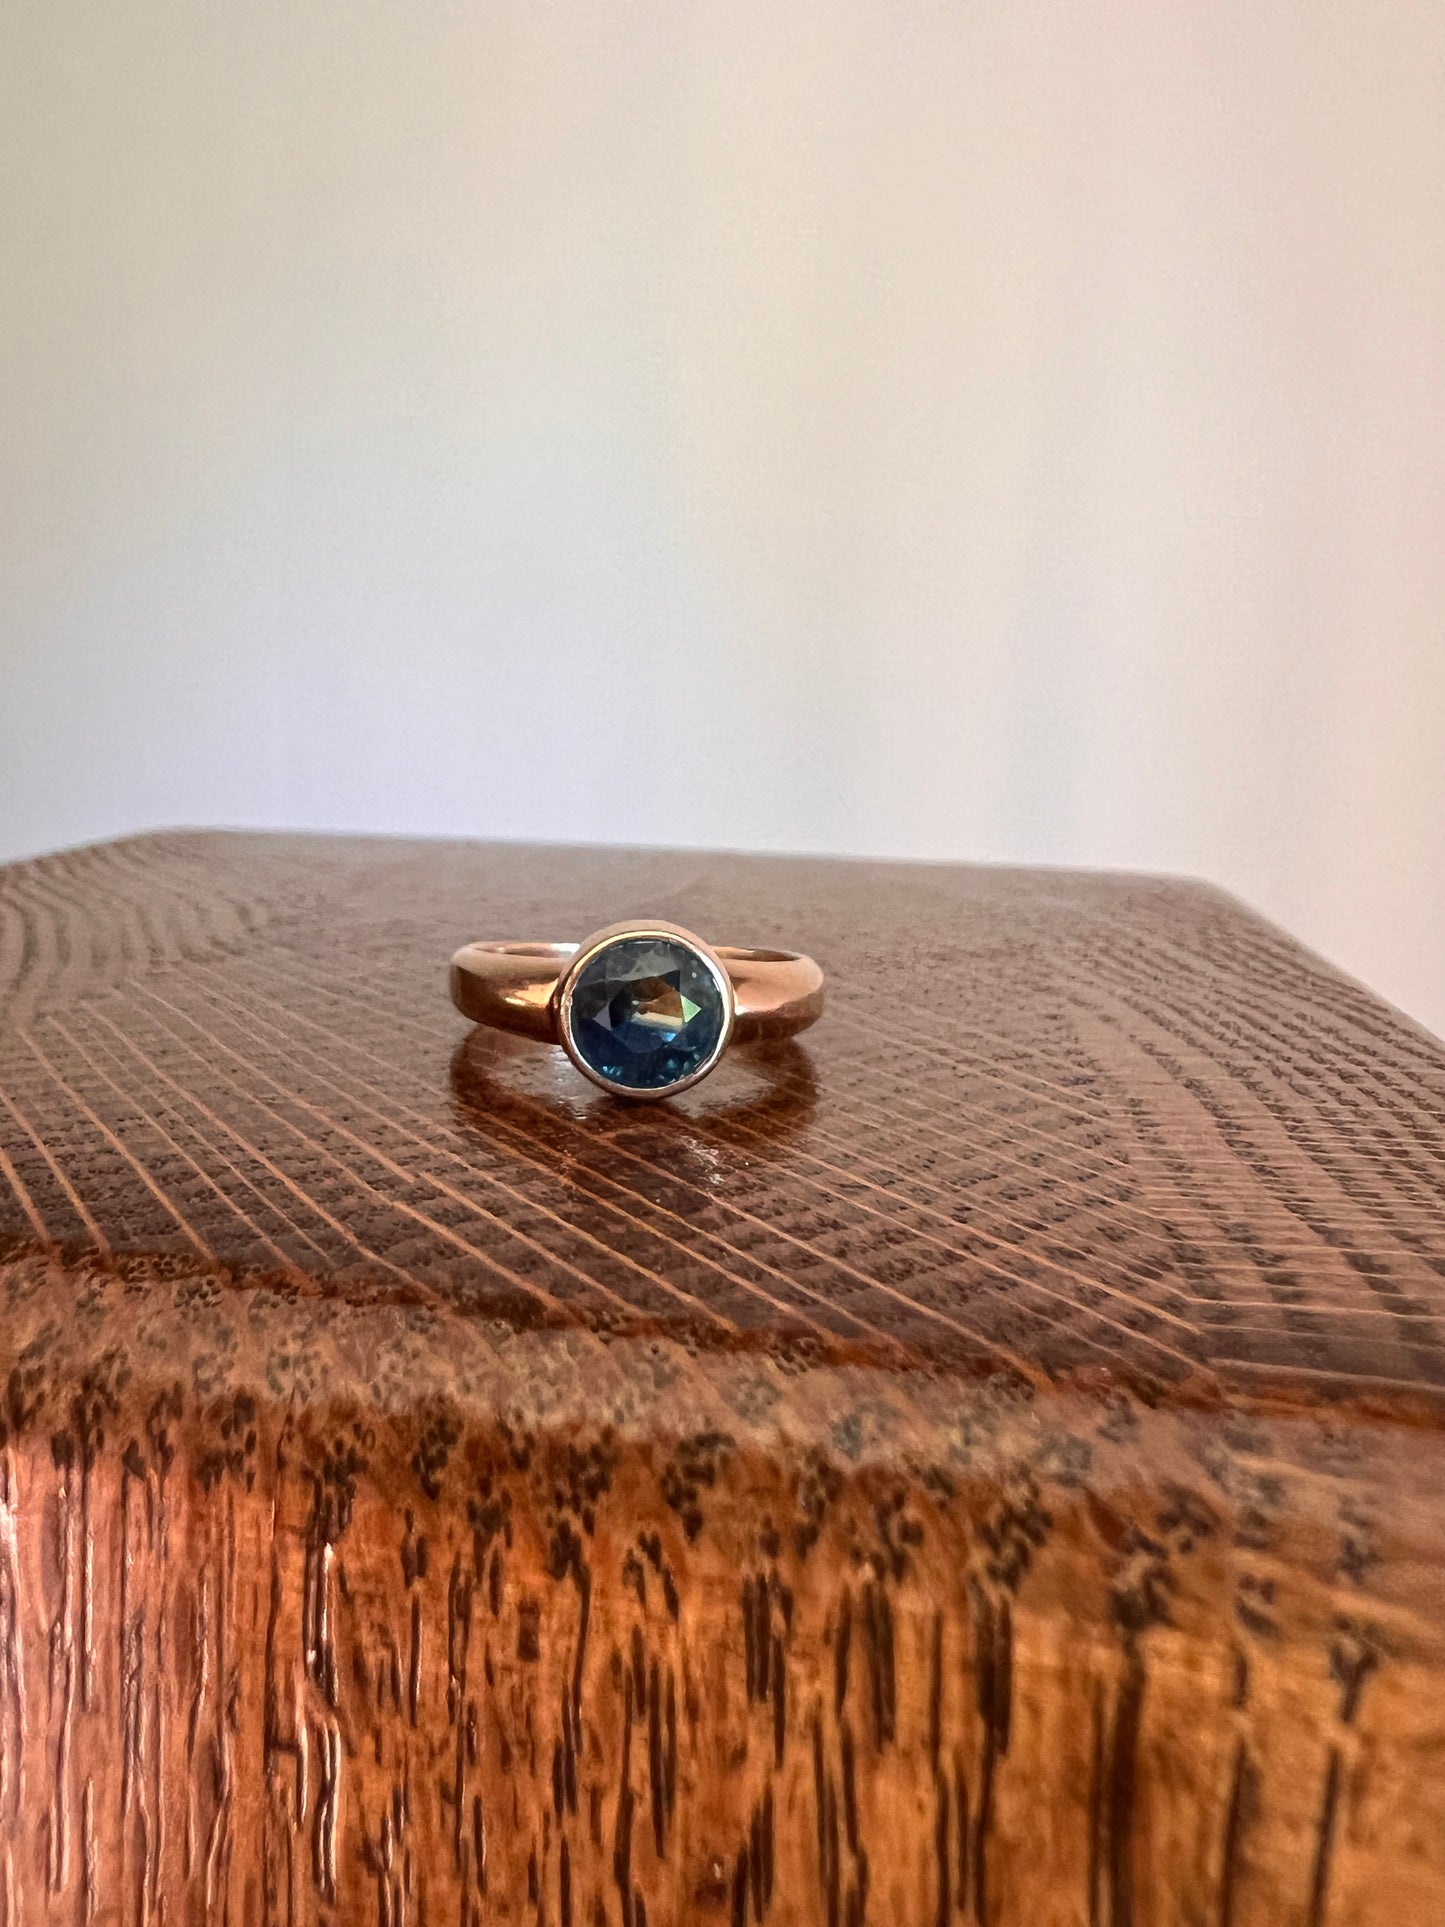 50/50 GREEN Half BLUE Natural Old Cut Sapphire Victorian Ring